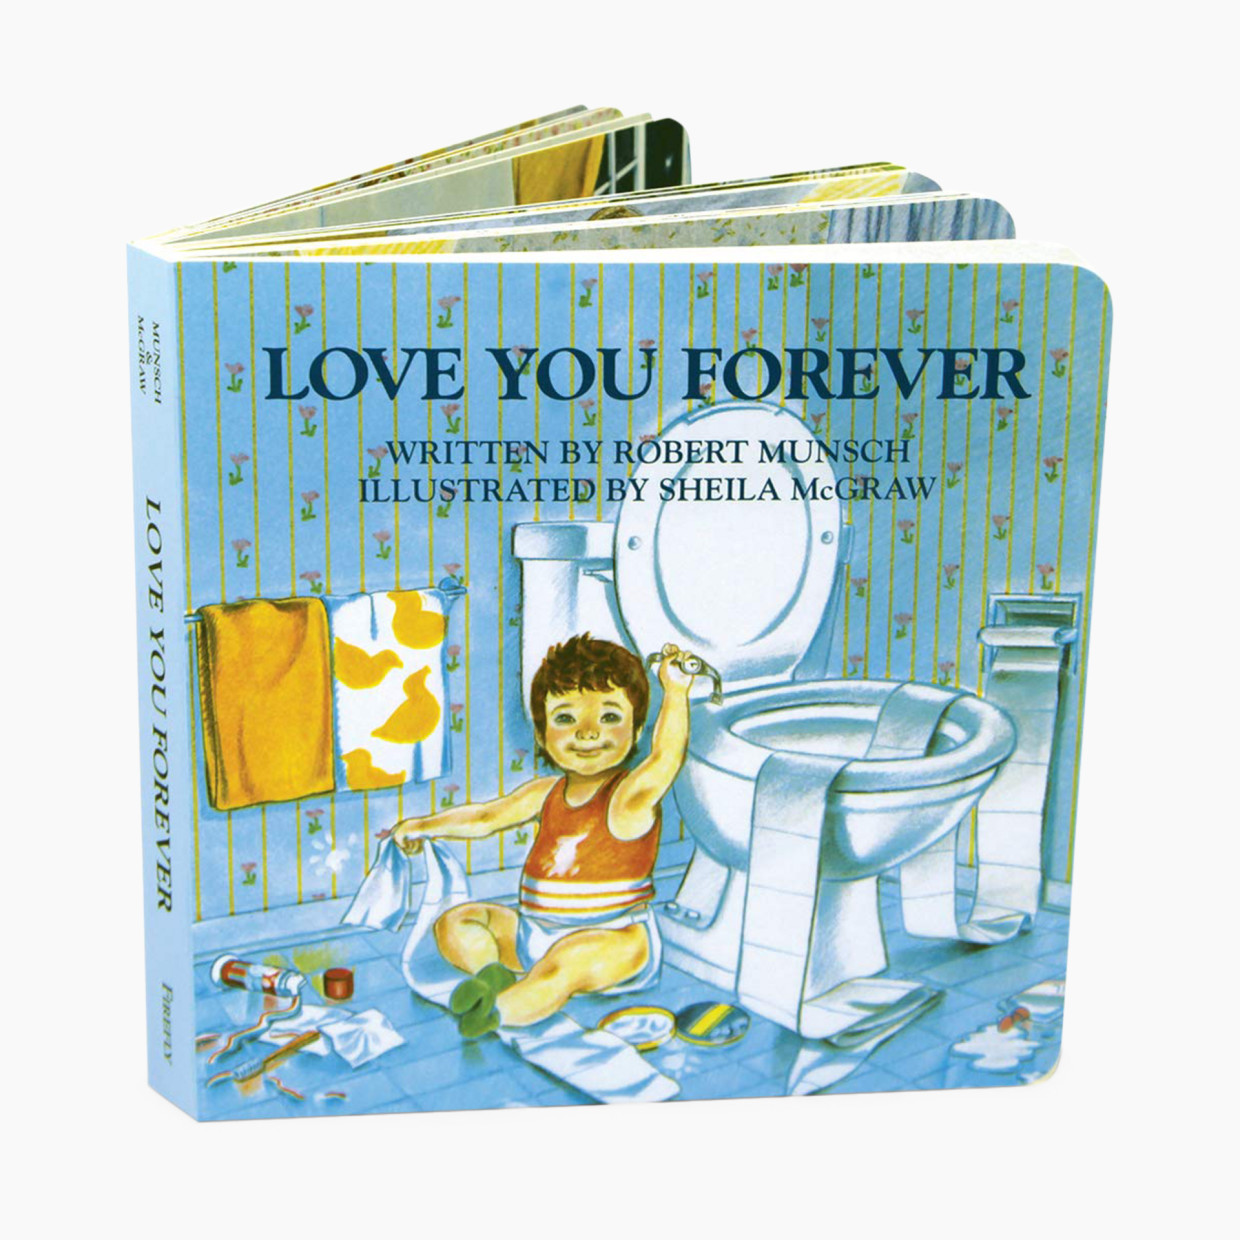 Love You Forever Board Book.